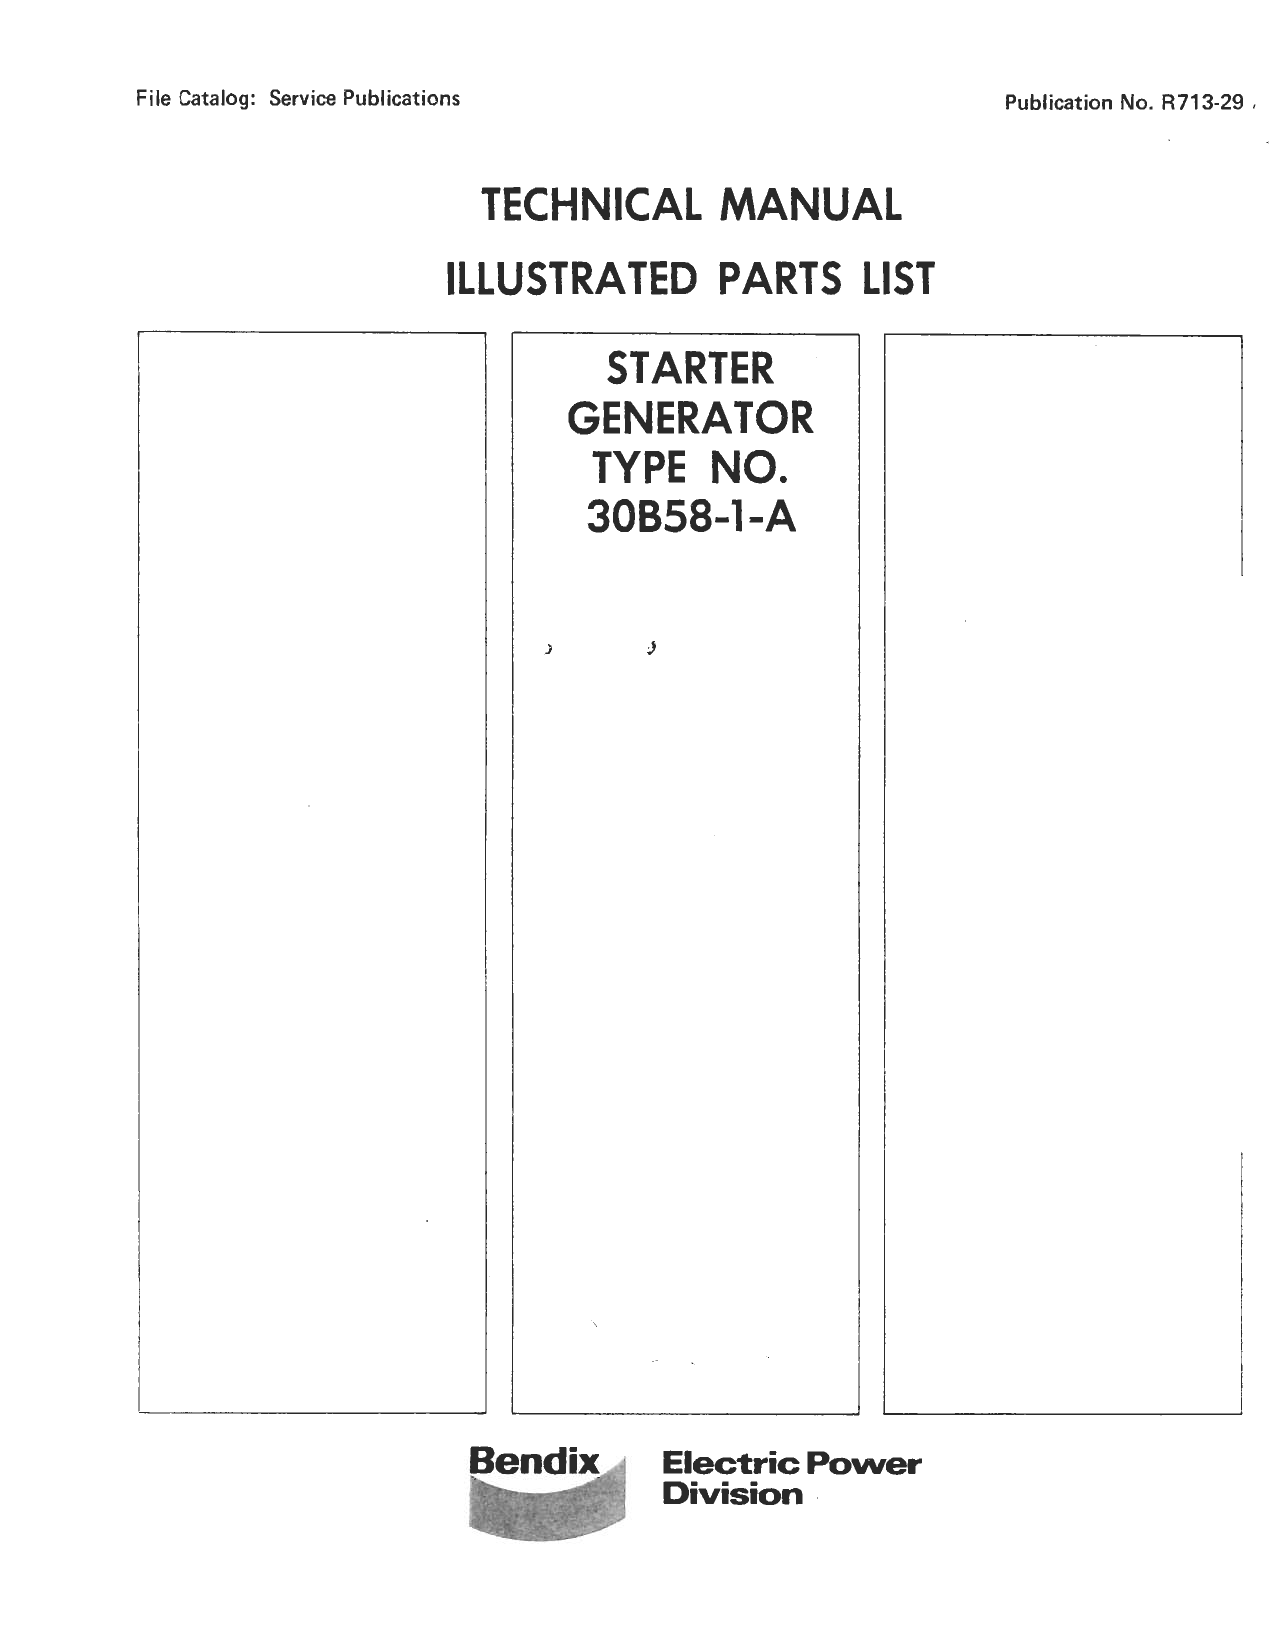 Sample page 1 from AirCorps Library document: Illustrated Parts List for Starter Generator - Type 30B58-1-A 